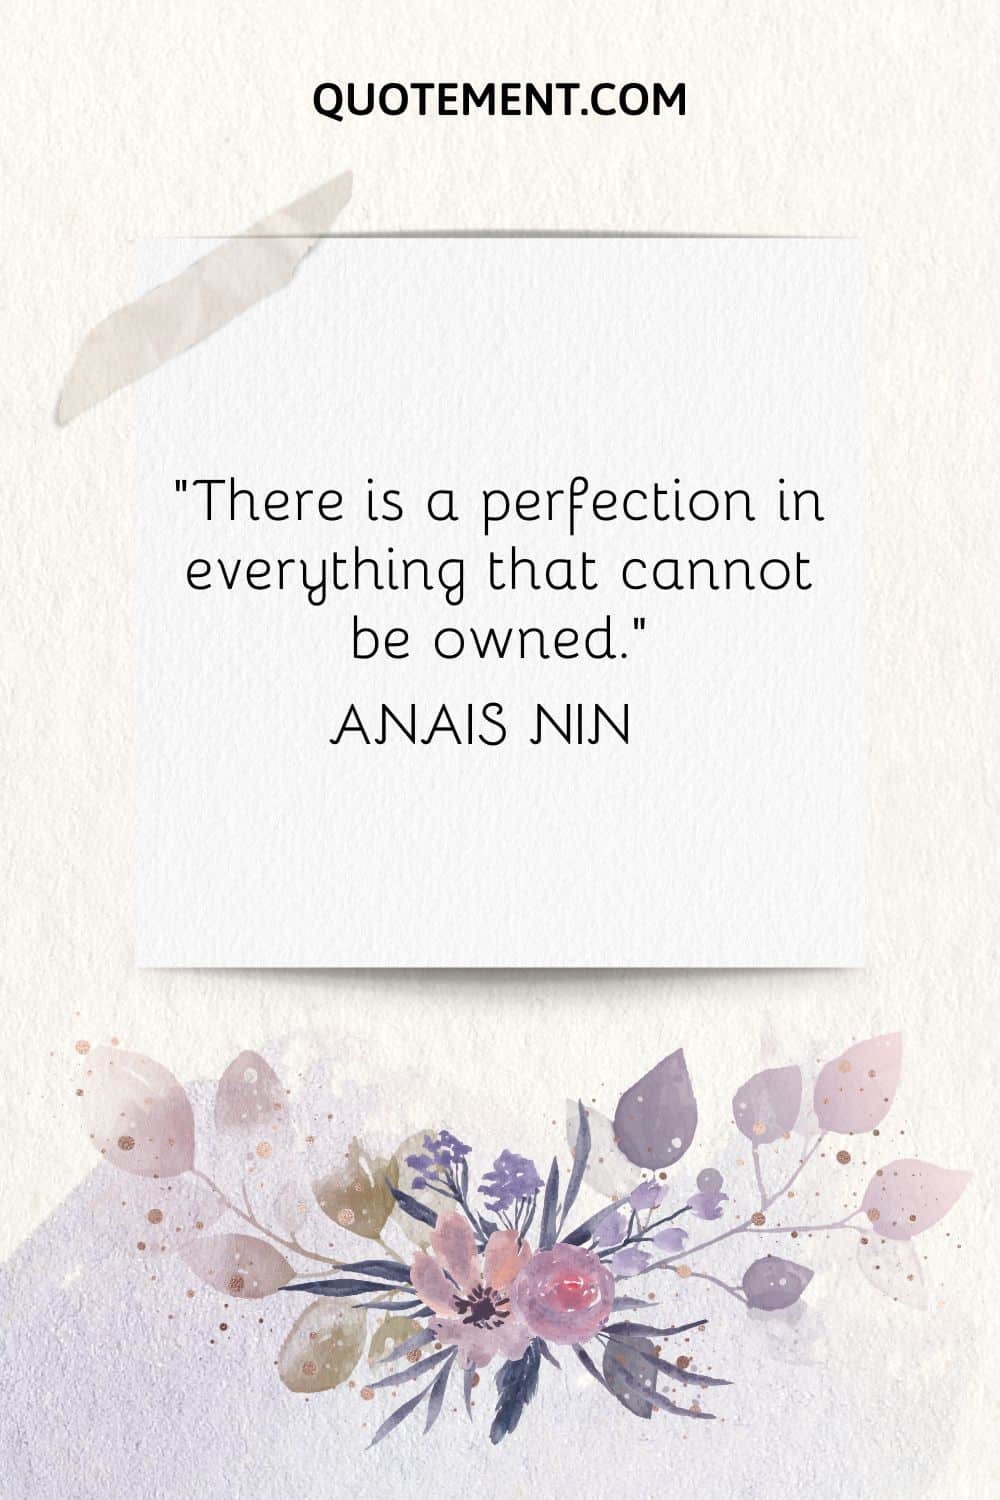 “There is a perfection in everything that cannot be owned.” — Anais Nin